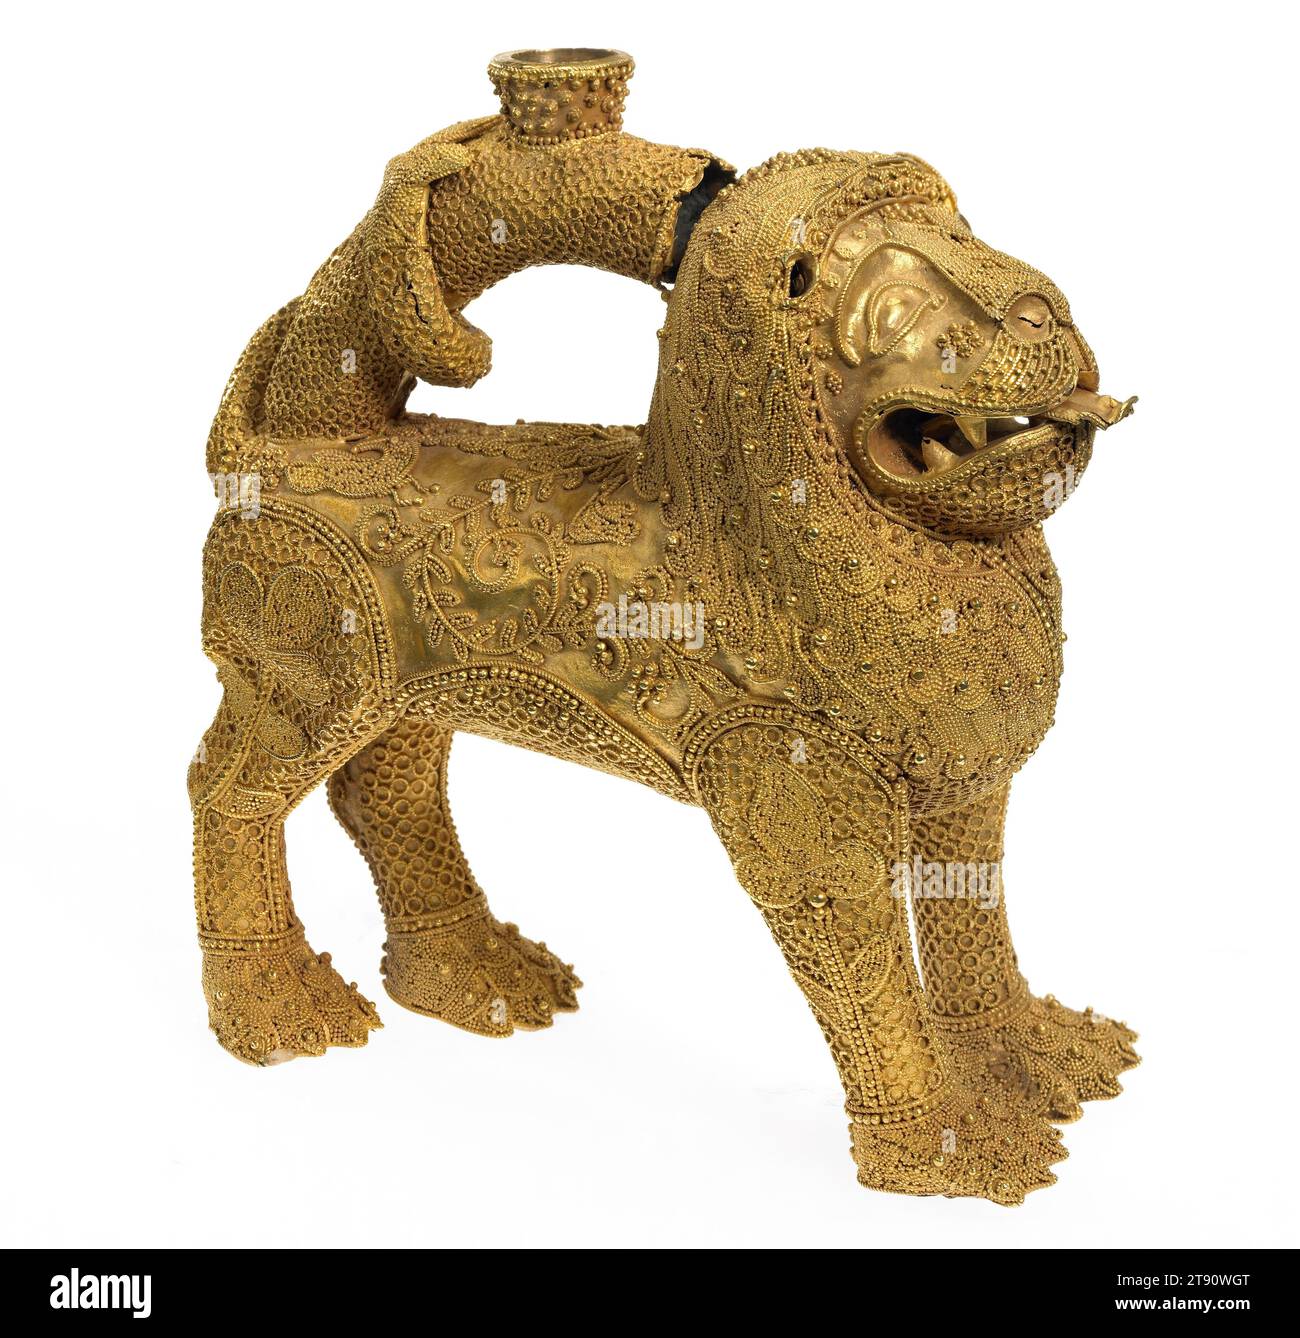 Statuette of a lion, 11th-12th century, Unknown, 4 3/4 x 4 x 2in. (12.1 x 10.2 x 5.1cm), Gold, Spain, 11th-12th century, This rare and enigmatic gold sculpture of a lion—a symbol of power and authority—is elaborately decorated with looping filigree and fine granulation, in keeping with the Islamic goldsmithing traditions of the later Muslim kingdoms of the Iberian Peninsula (present-day Spain and Portugal). Islam arrived in Europe in 711 CE, bringing new traditions in the decorative arts, such as the animal-shaped aquamanile: a vessel used for hand washing Stock Photo